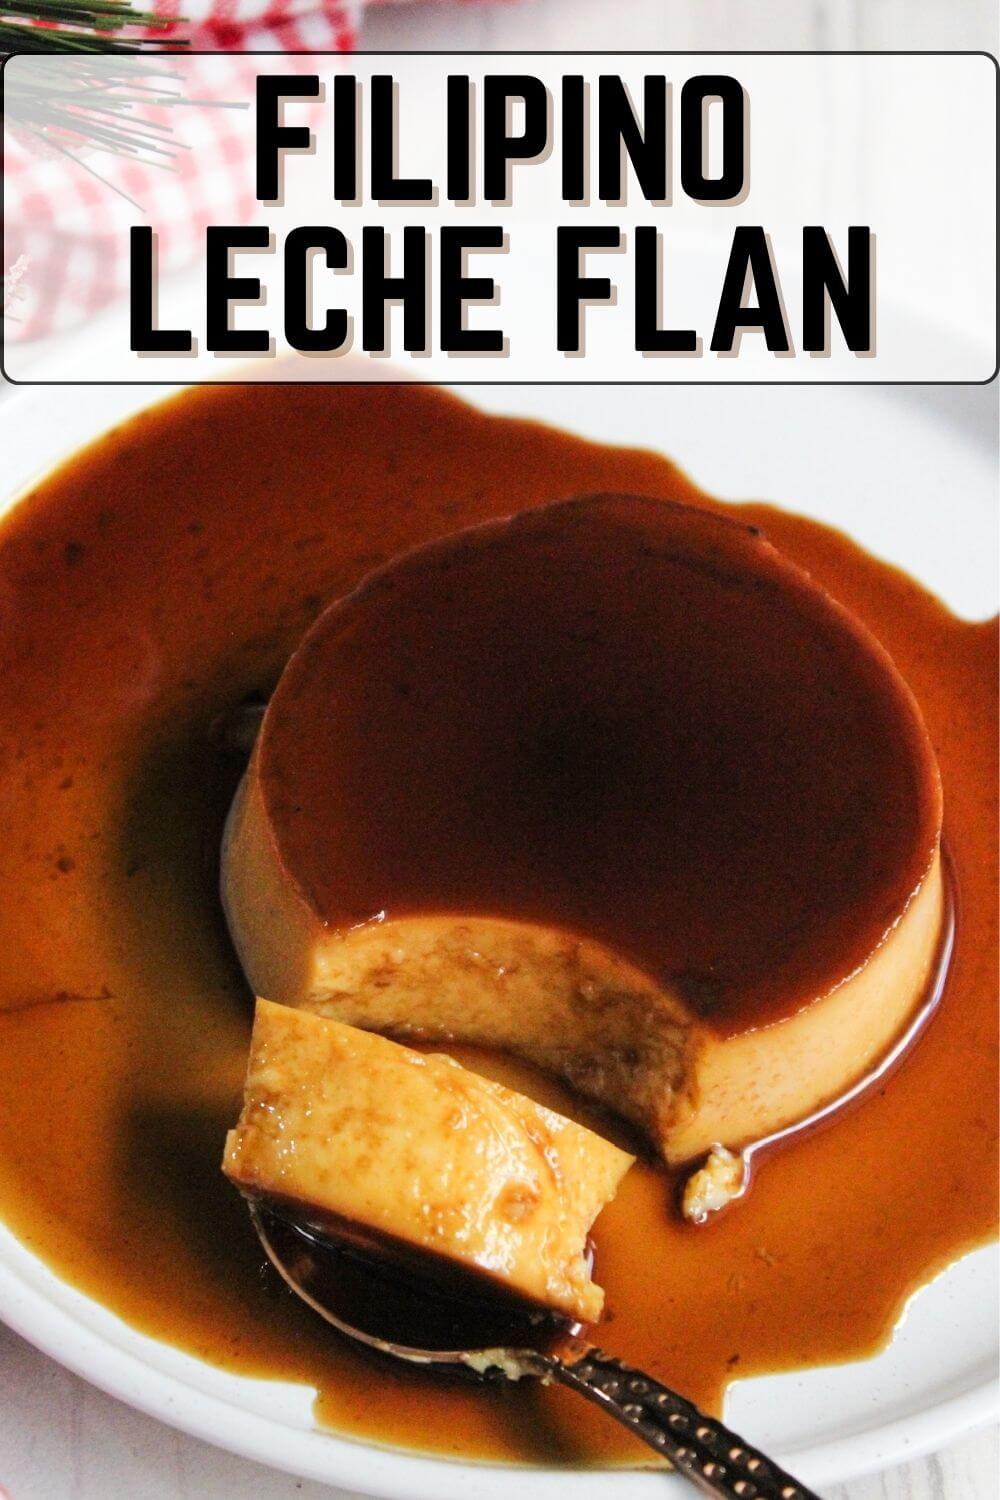     Leche flan, a popular Filipino dessert, elegantly presented on a plate with a spoon.